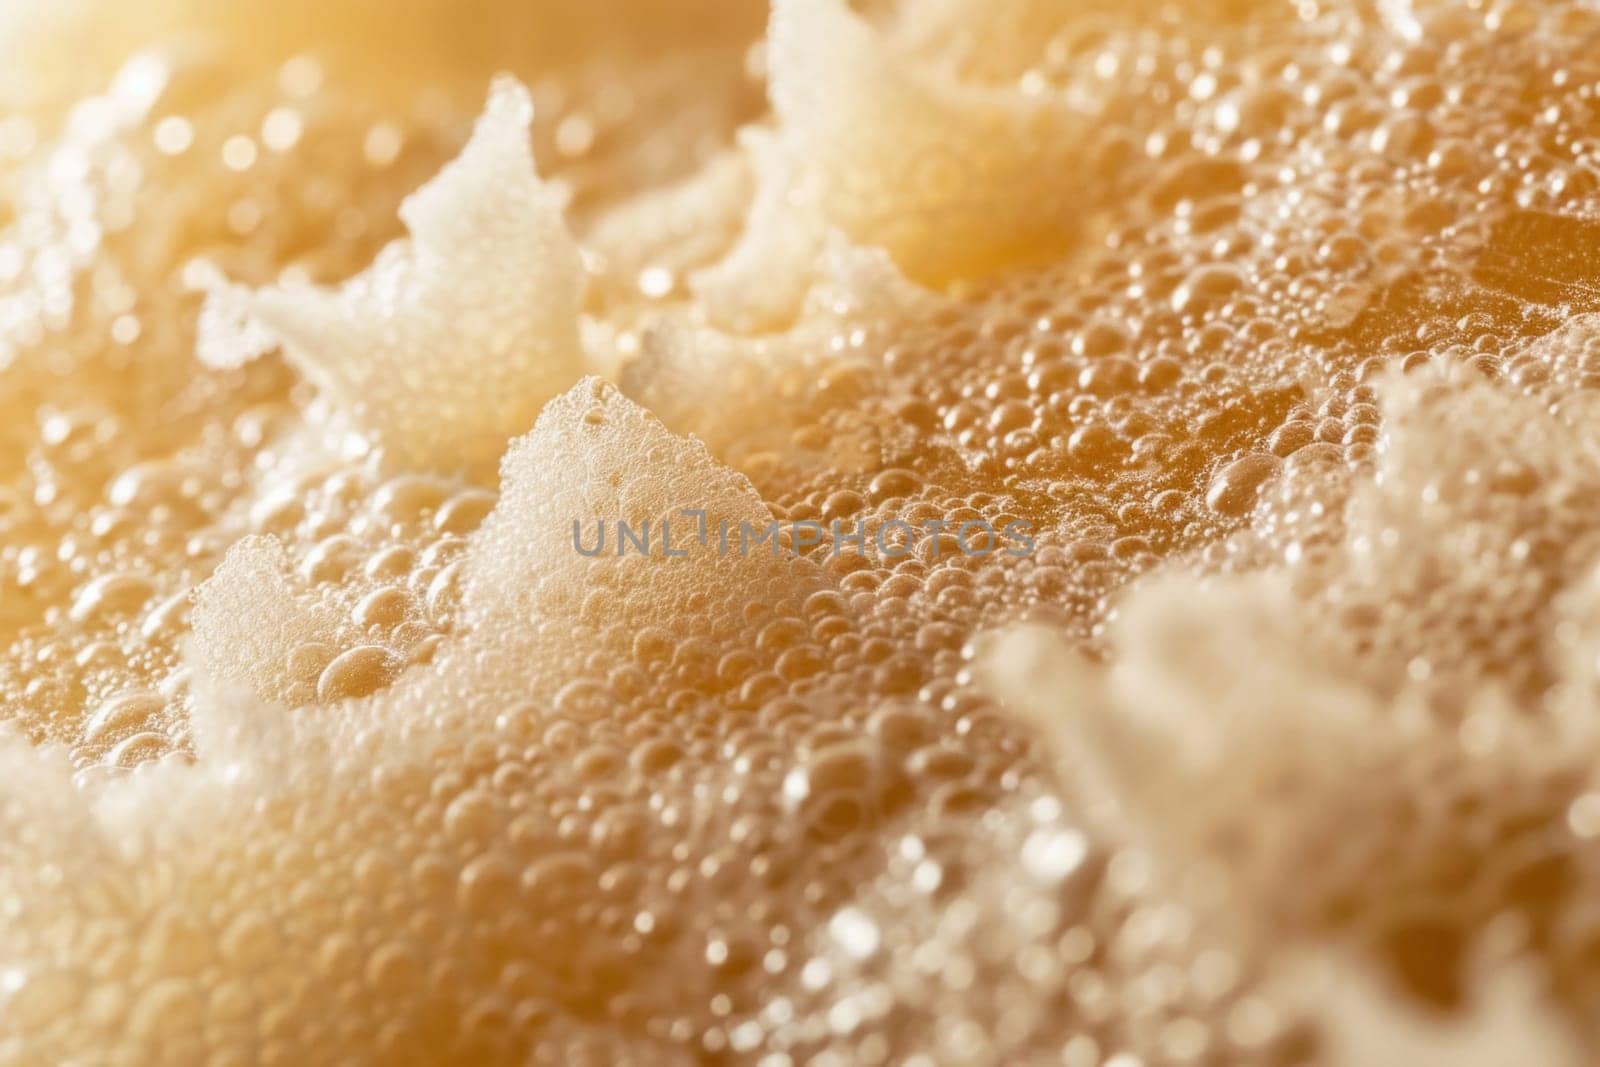 Macro photography of freshly exfoliated skin revealing a soft, golden glow and the refined texture of healthy complexion